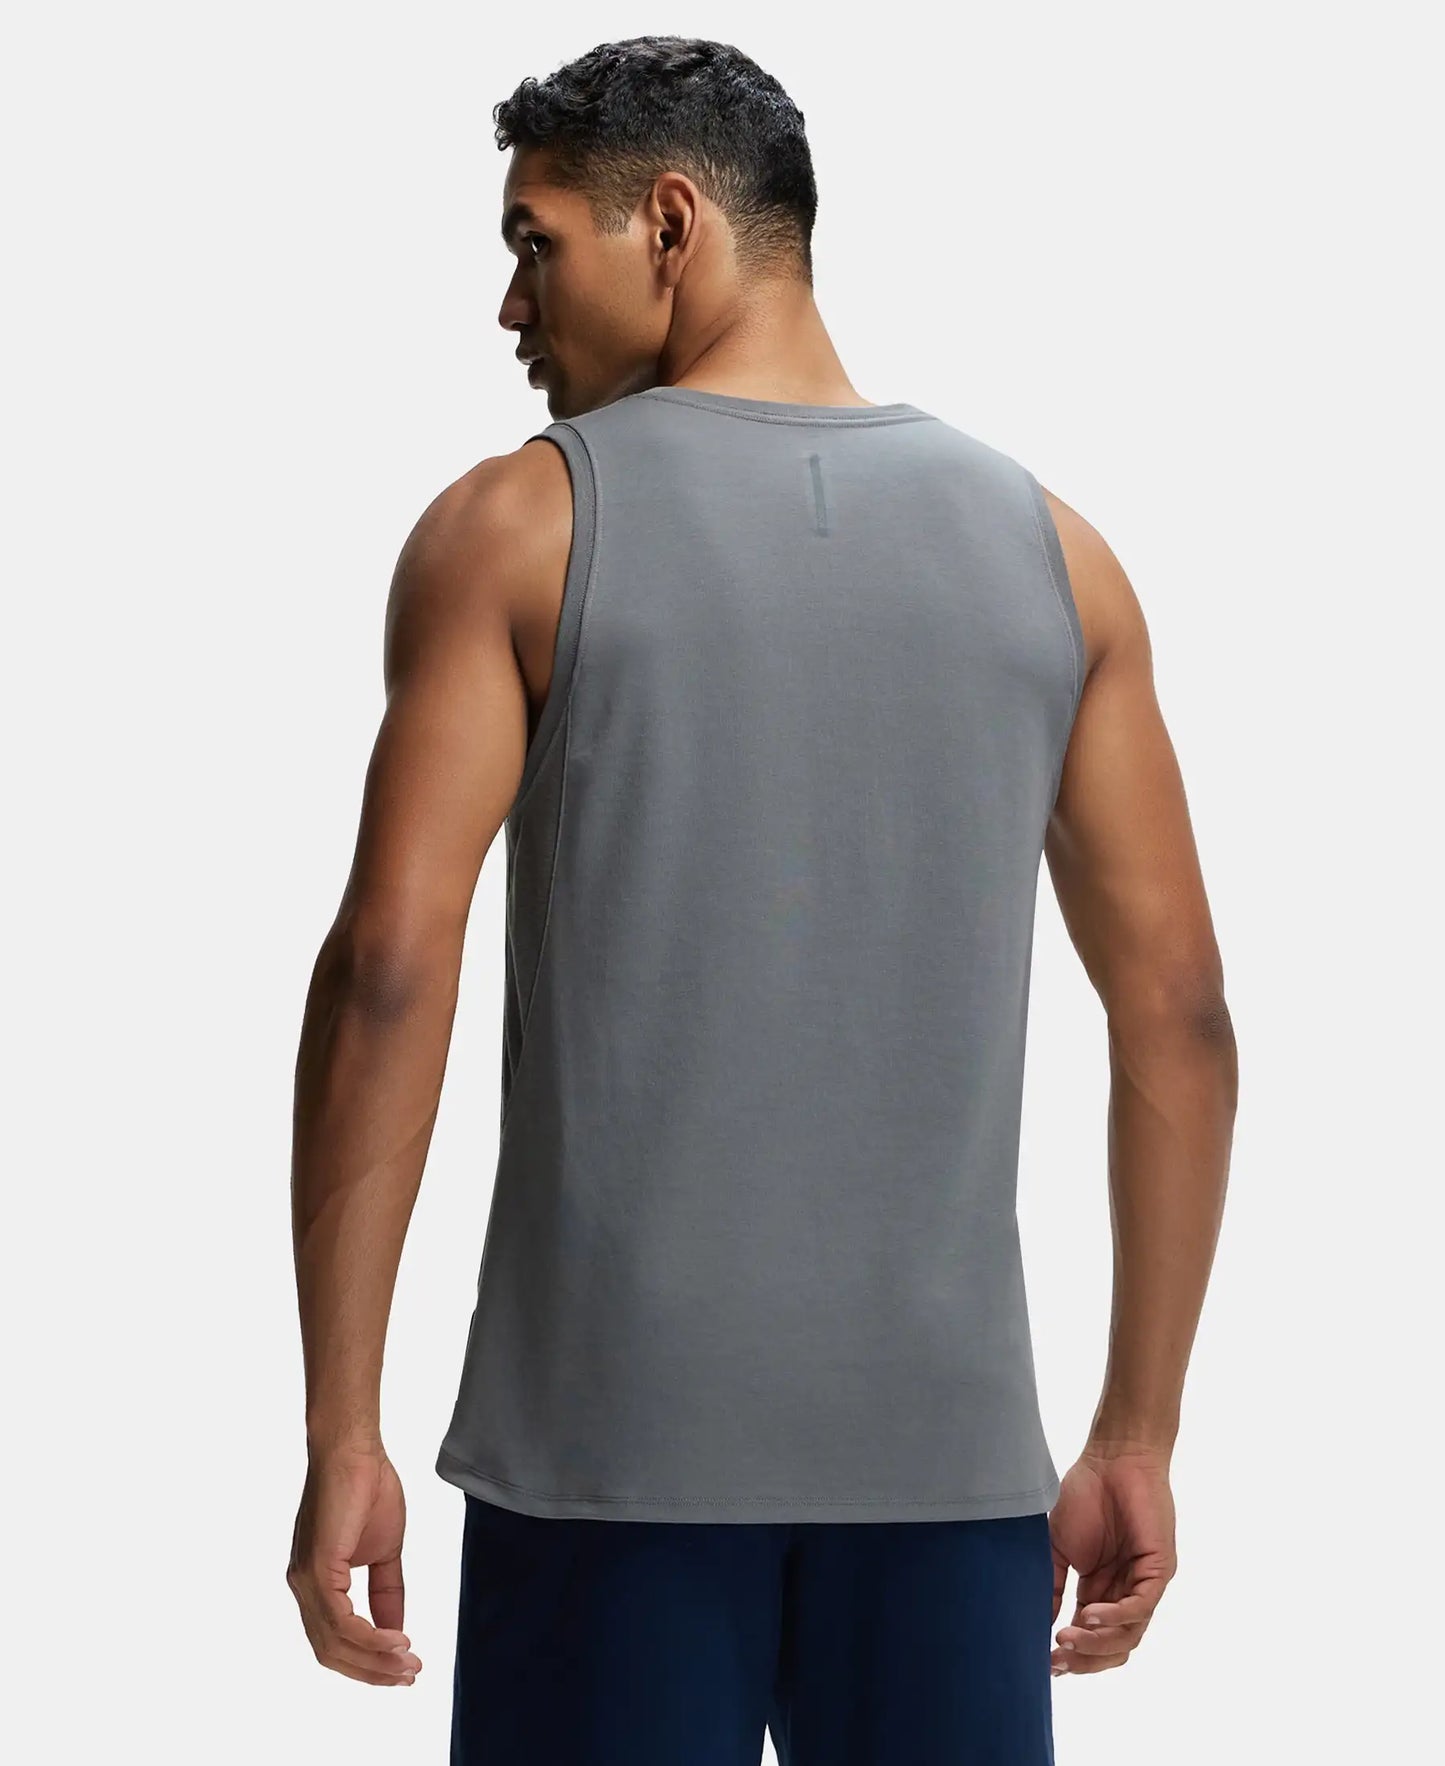 Super Combed Cotton Blend Solid Performance Tank Top with Breathable Mesh - Quiet Shade-3